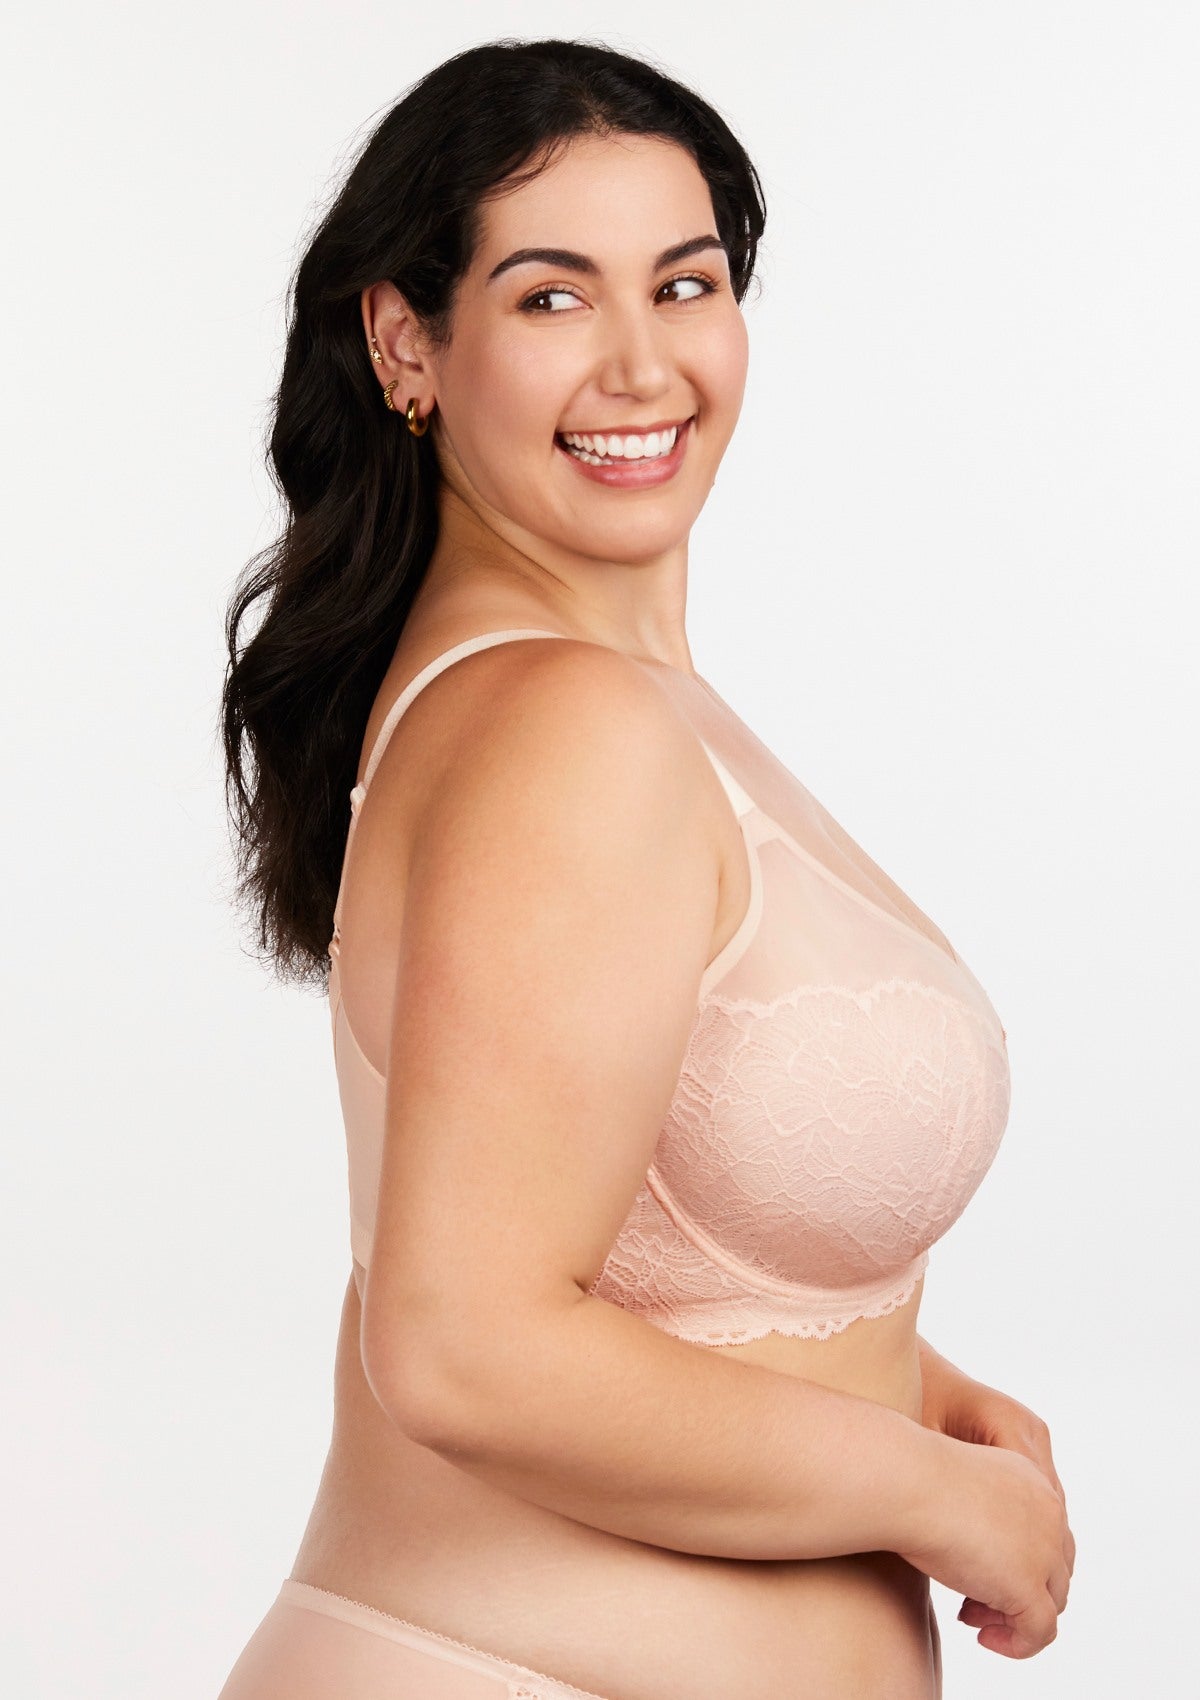 HSIA Blossom Sheer Lace Bra: Comfortable Underwire Bra For Big Busts - White / 42 / D